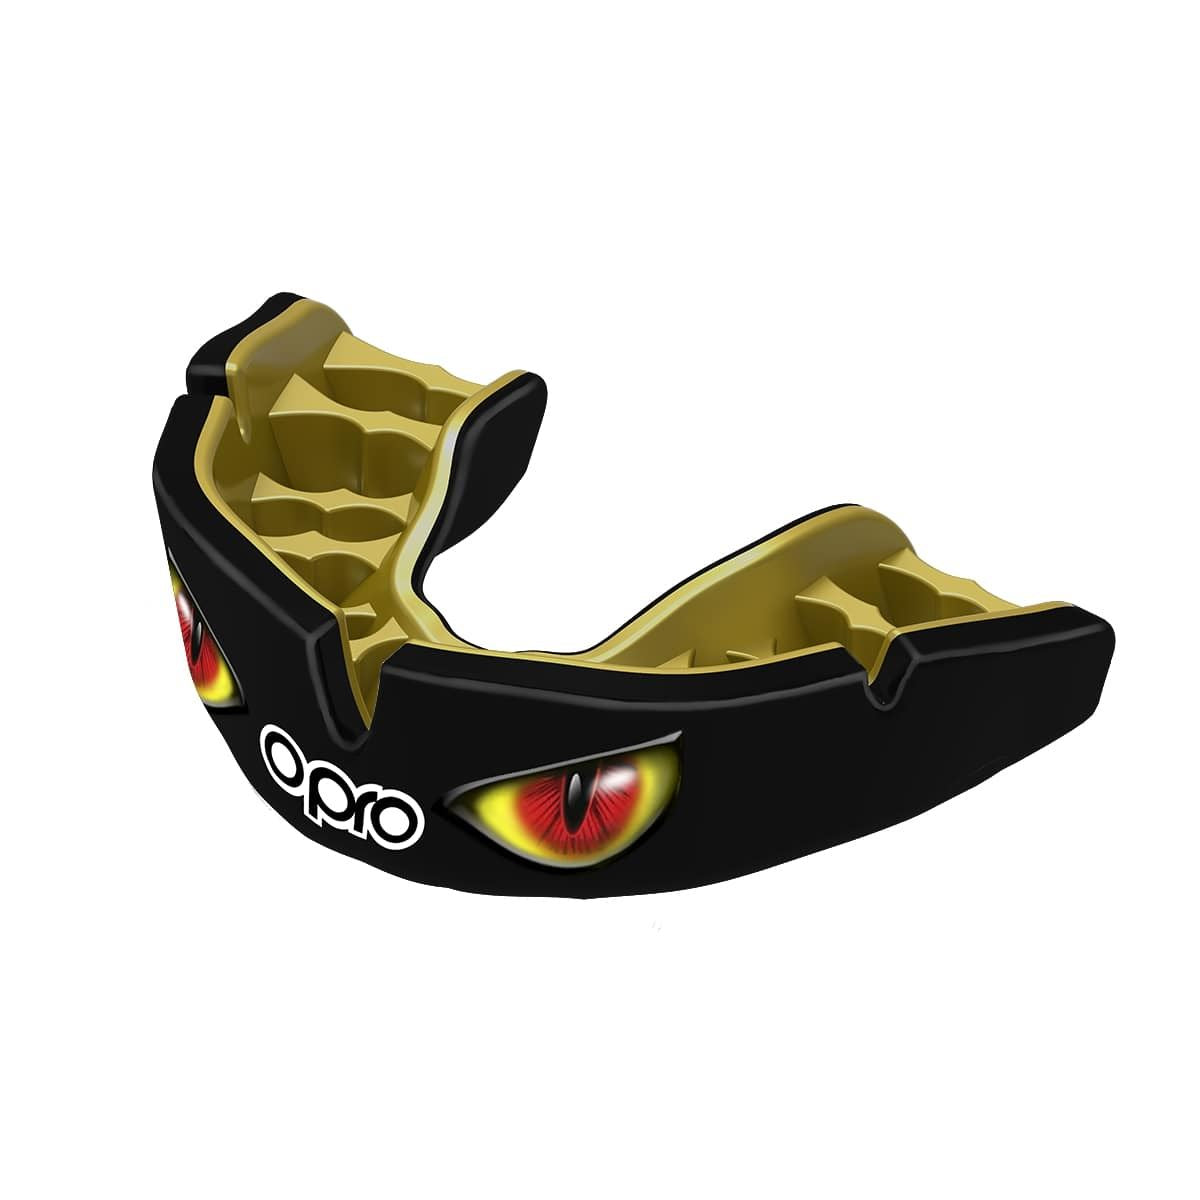 Men's Rugby Protective Mouthguard Opro Instant Custom Fit Eyes 2022 Black/Red/Gold